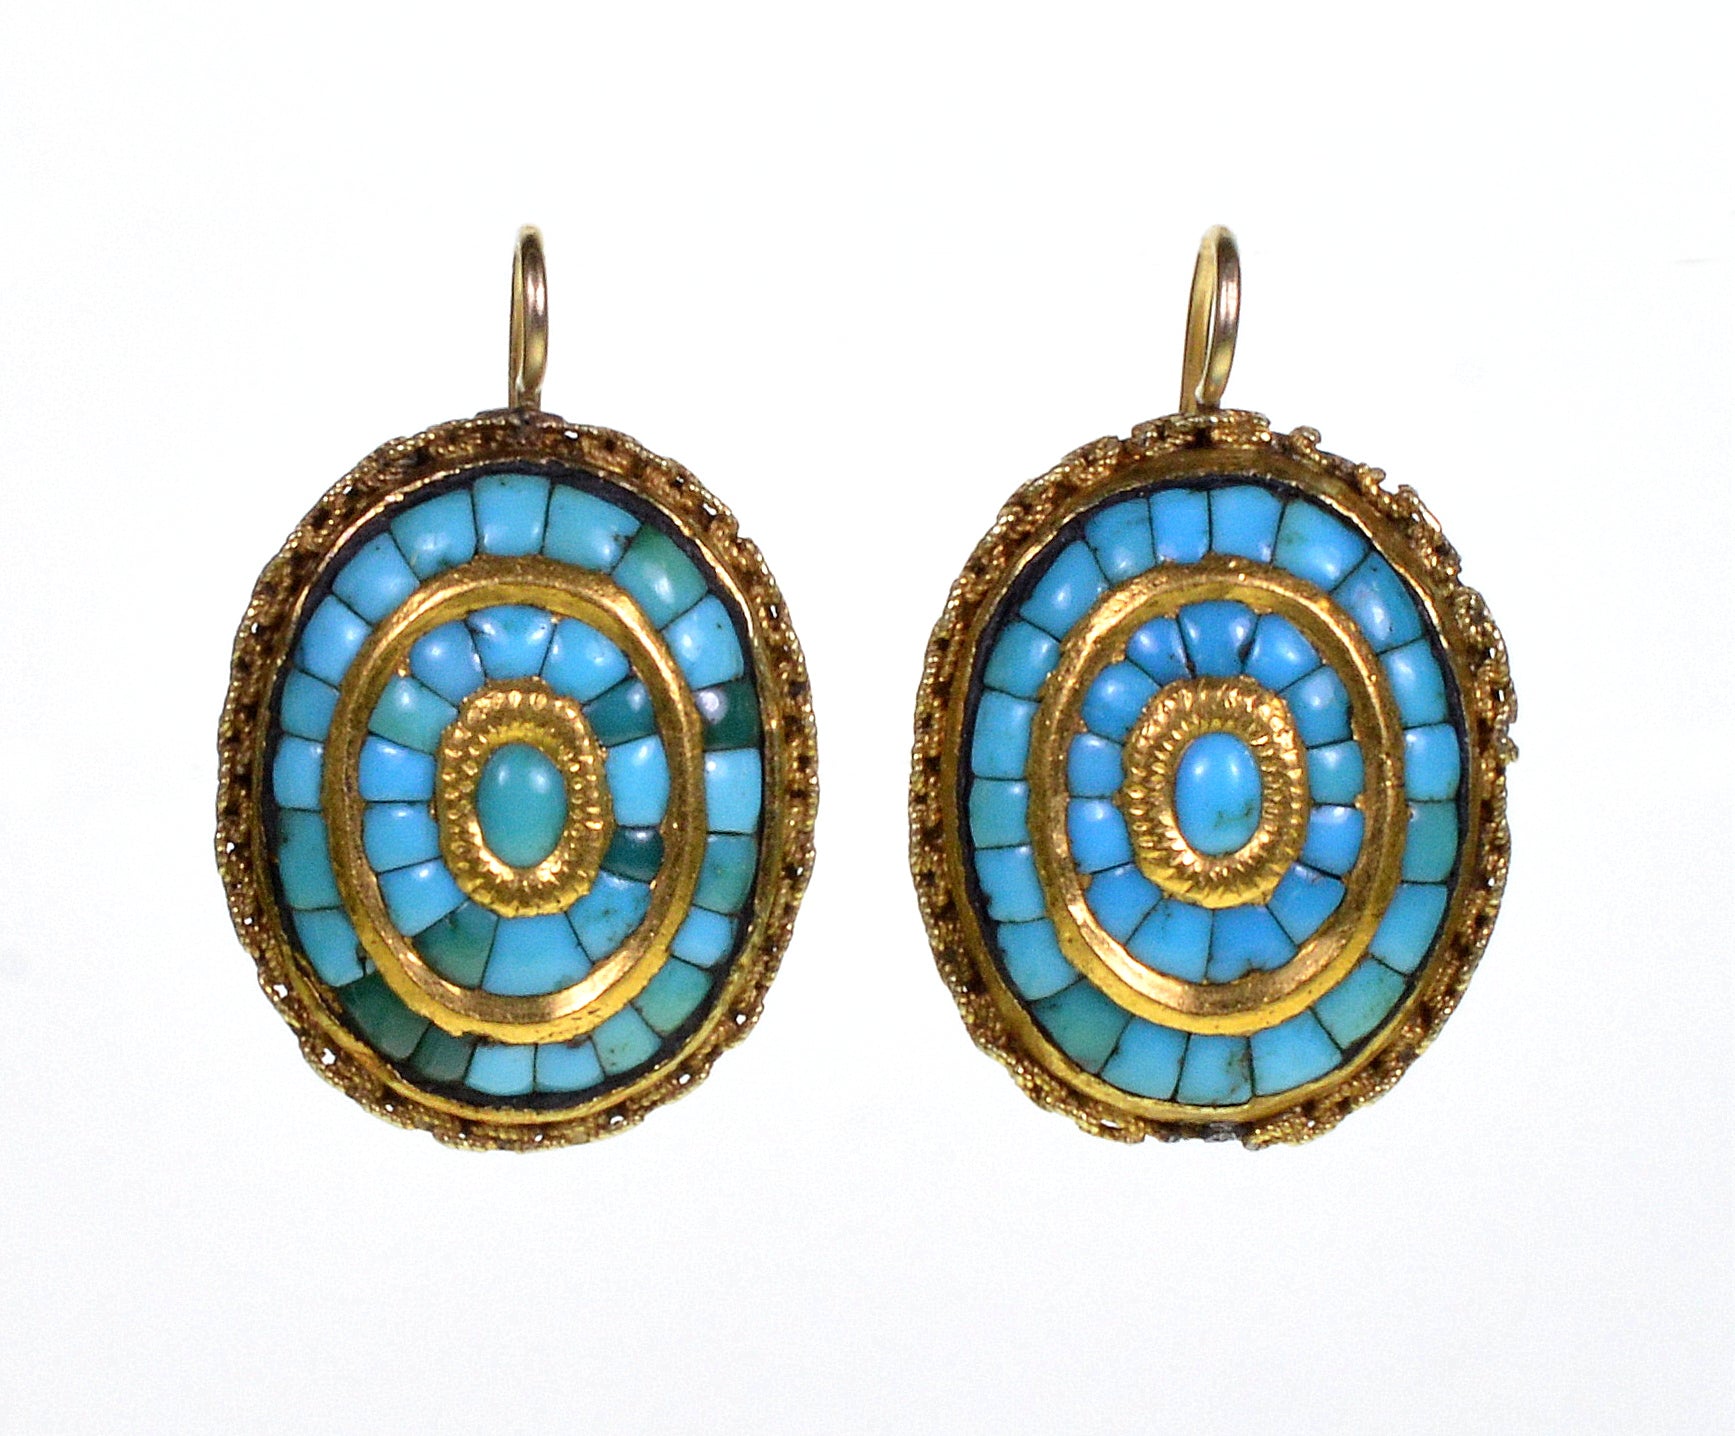 Antique Victorian Turquoise 14K Gold Earrings C.1860 003525